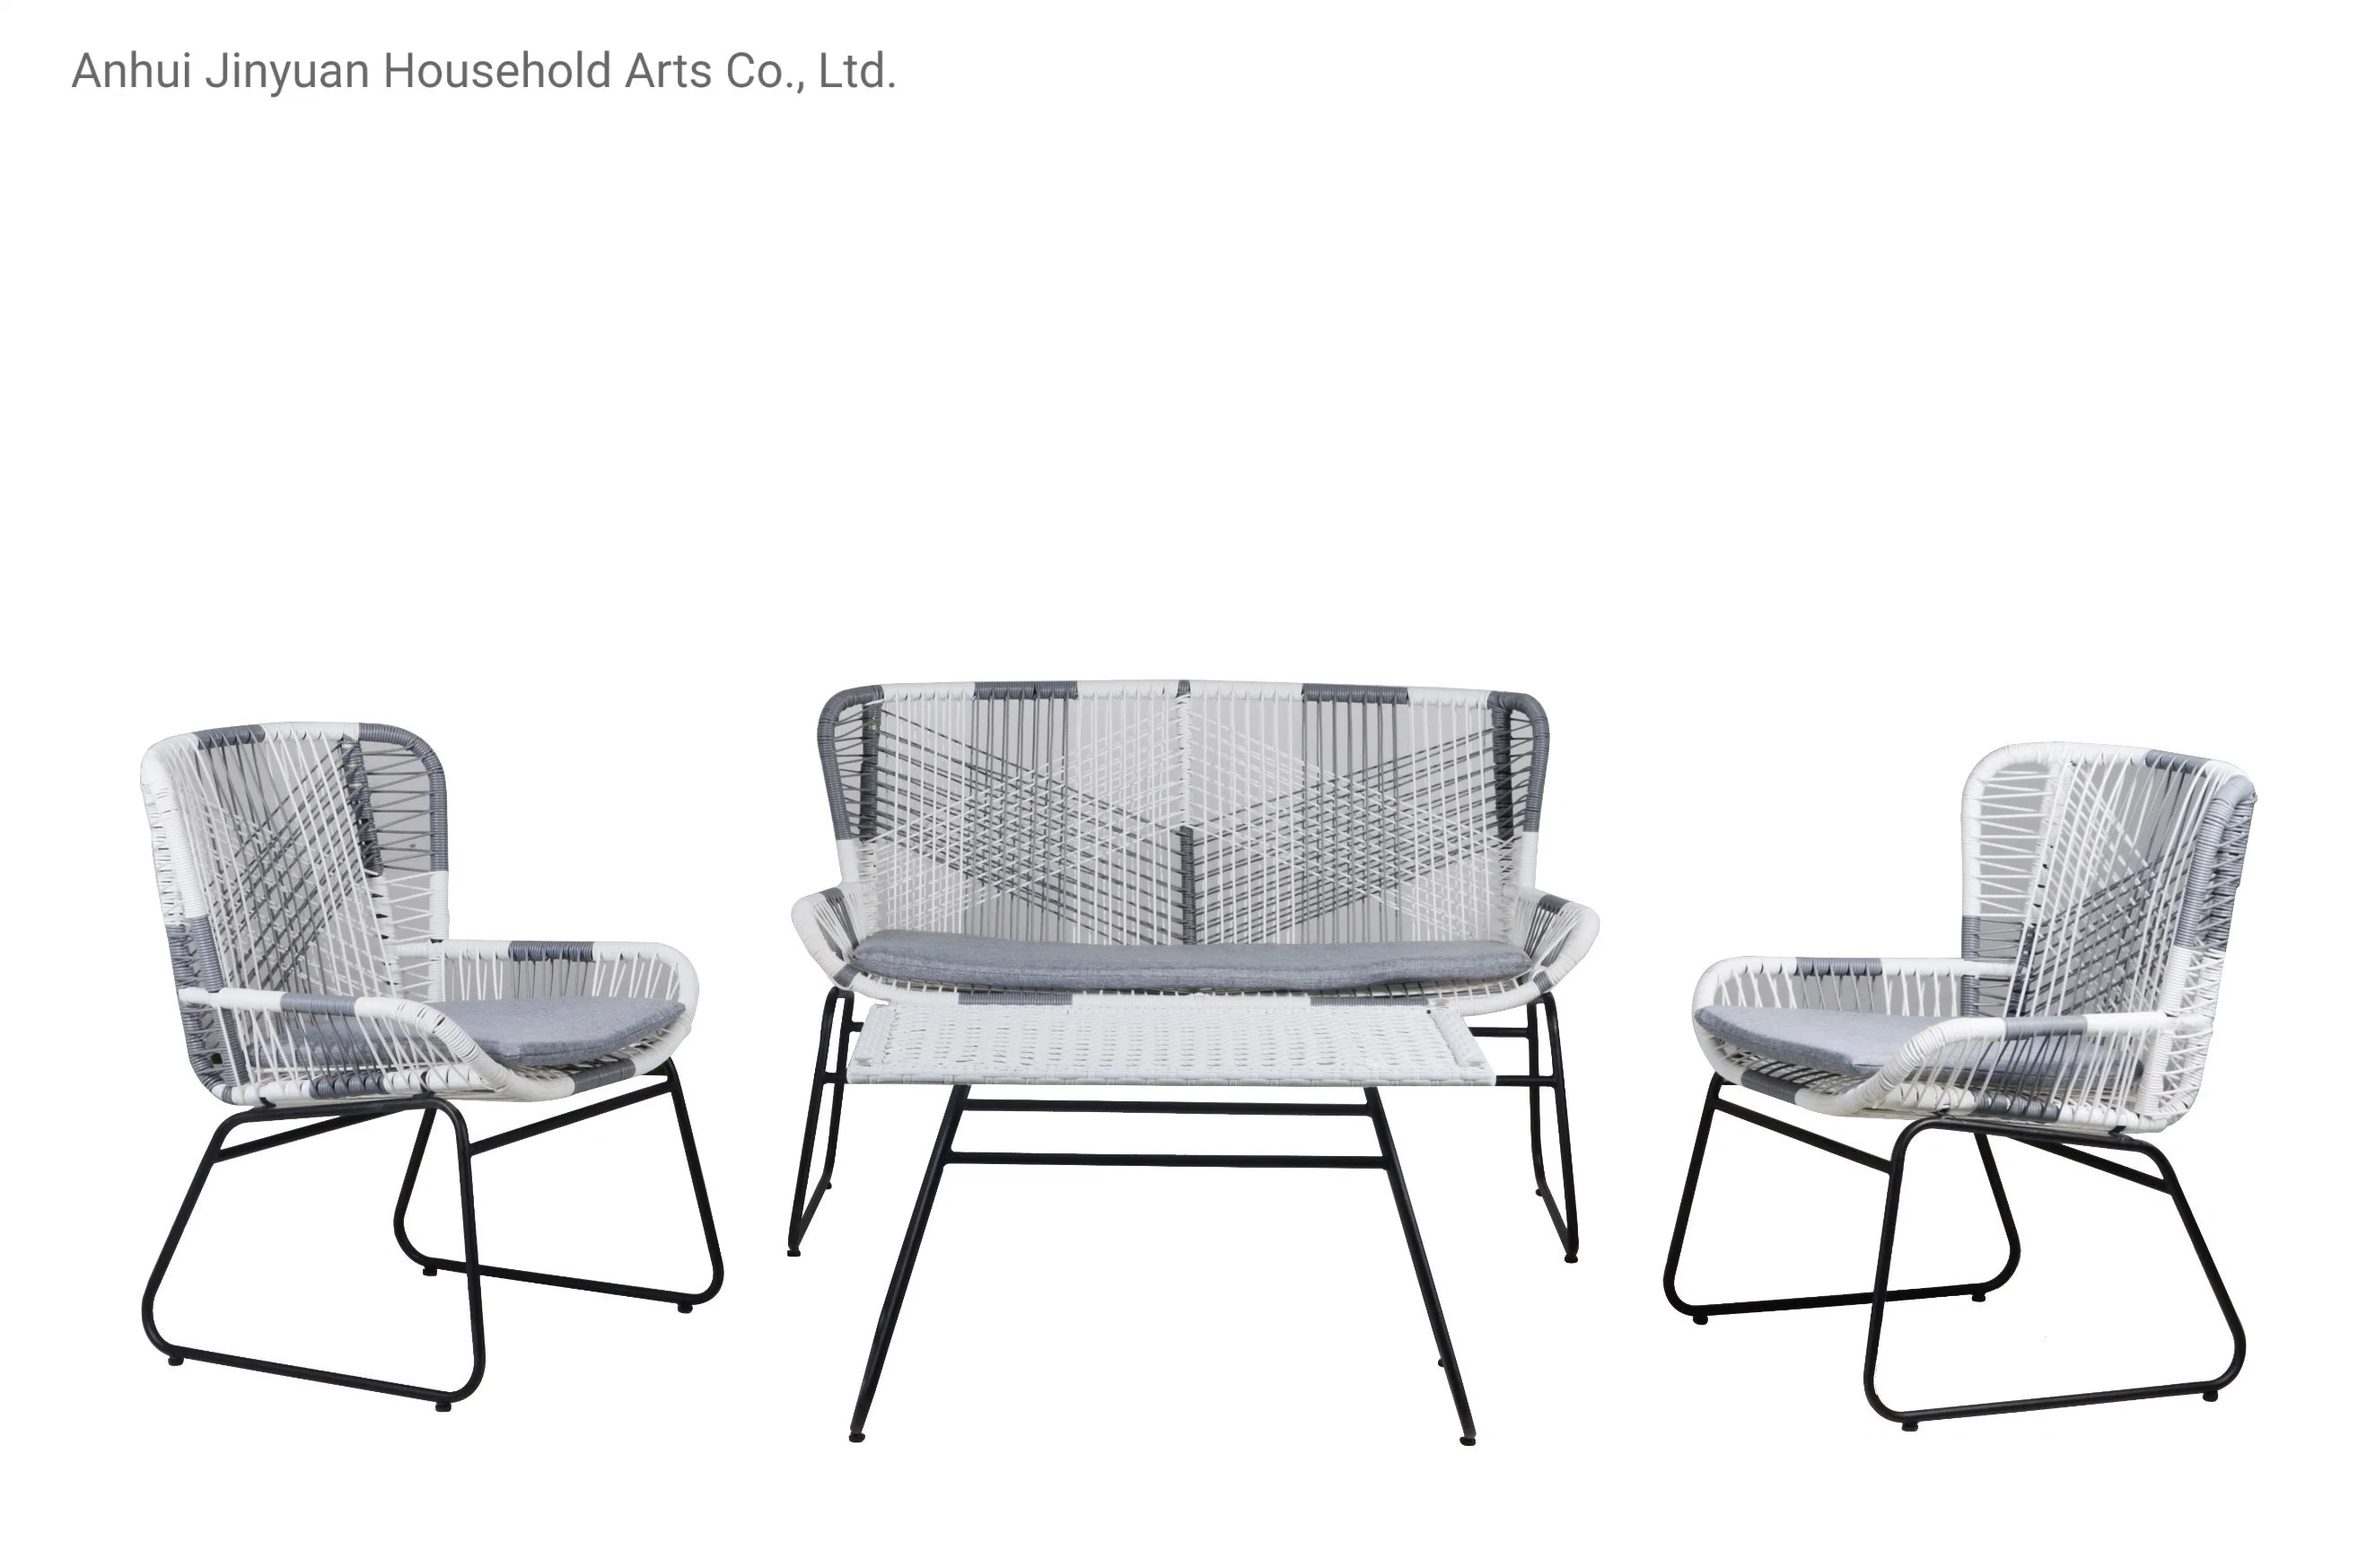 4-Piece Outdoor Dining Set and Dining Table Aluminum Furniture Chair